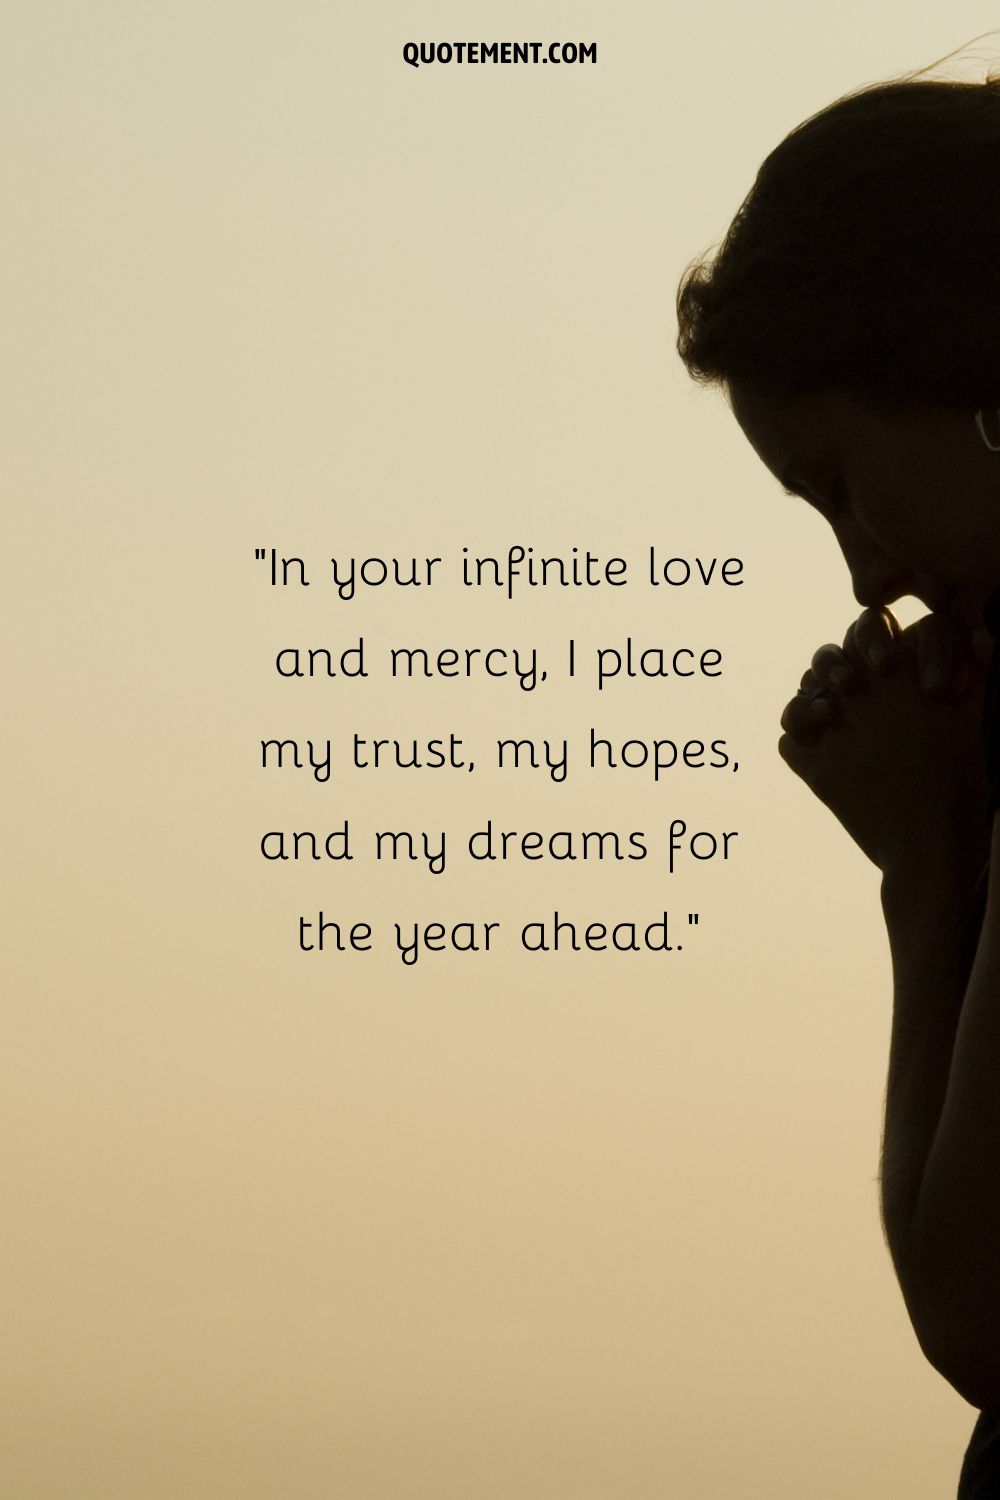 In your infinite love and mercy, I place my trust, my hopes, and my dreams for the year ahead